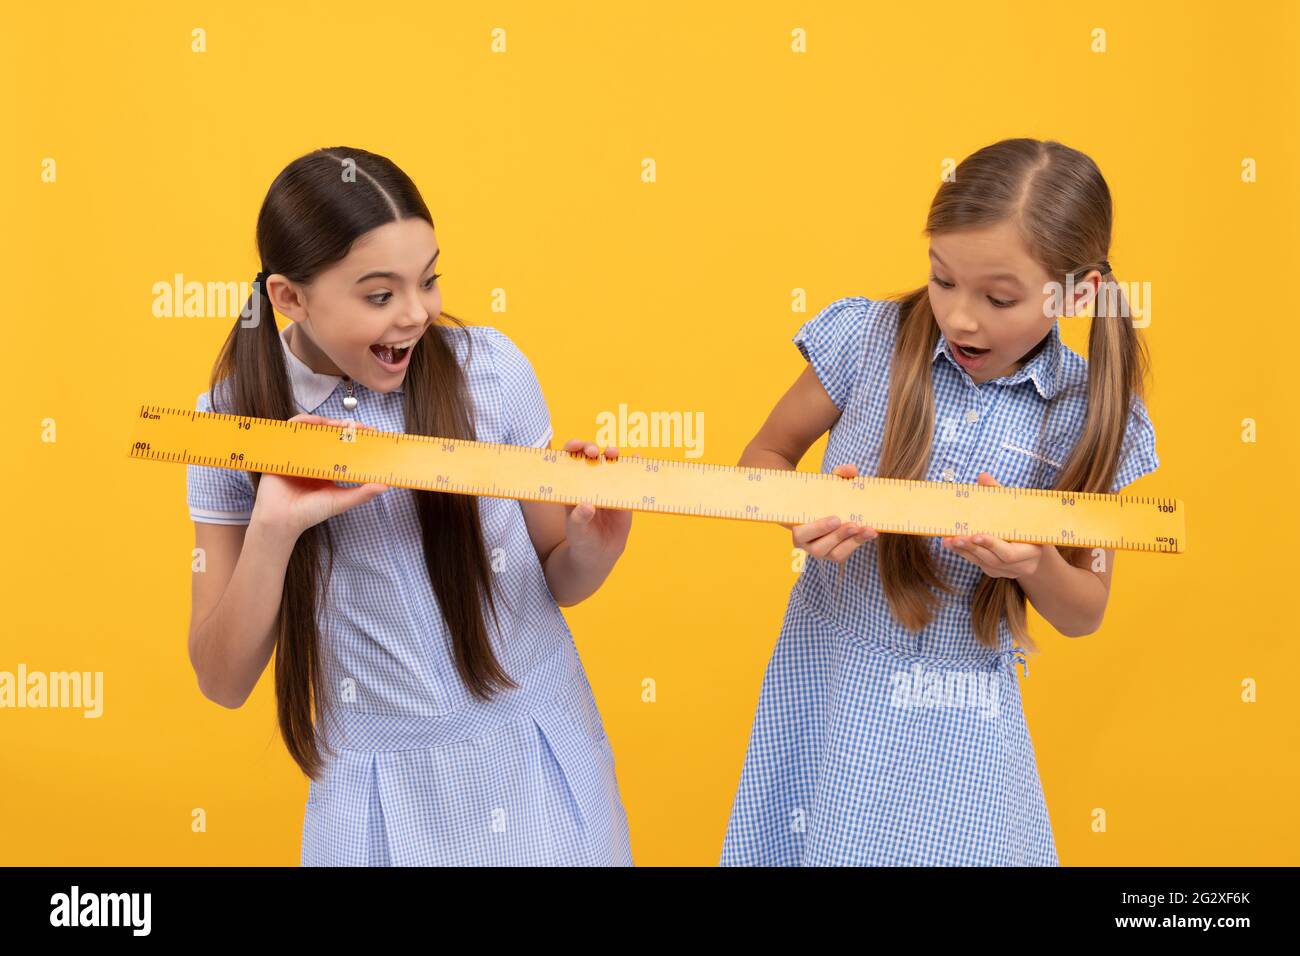 Surprised elementary school children measure length on geometry lesson yellow background, school ruler Stock Photo